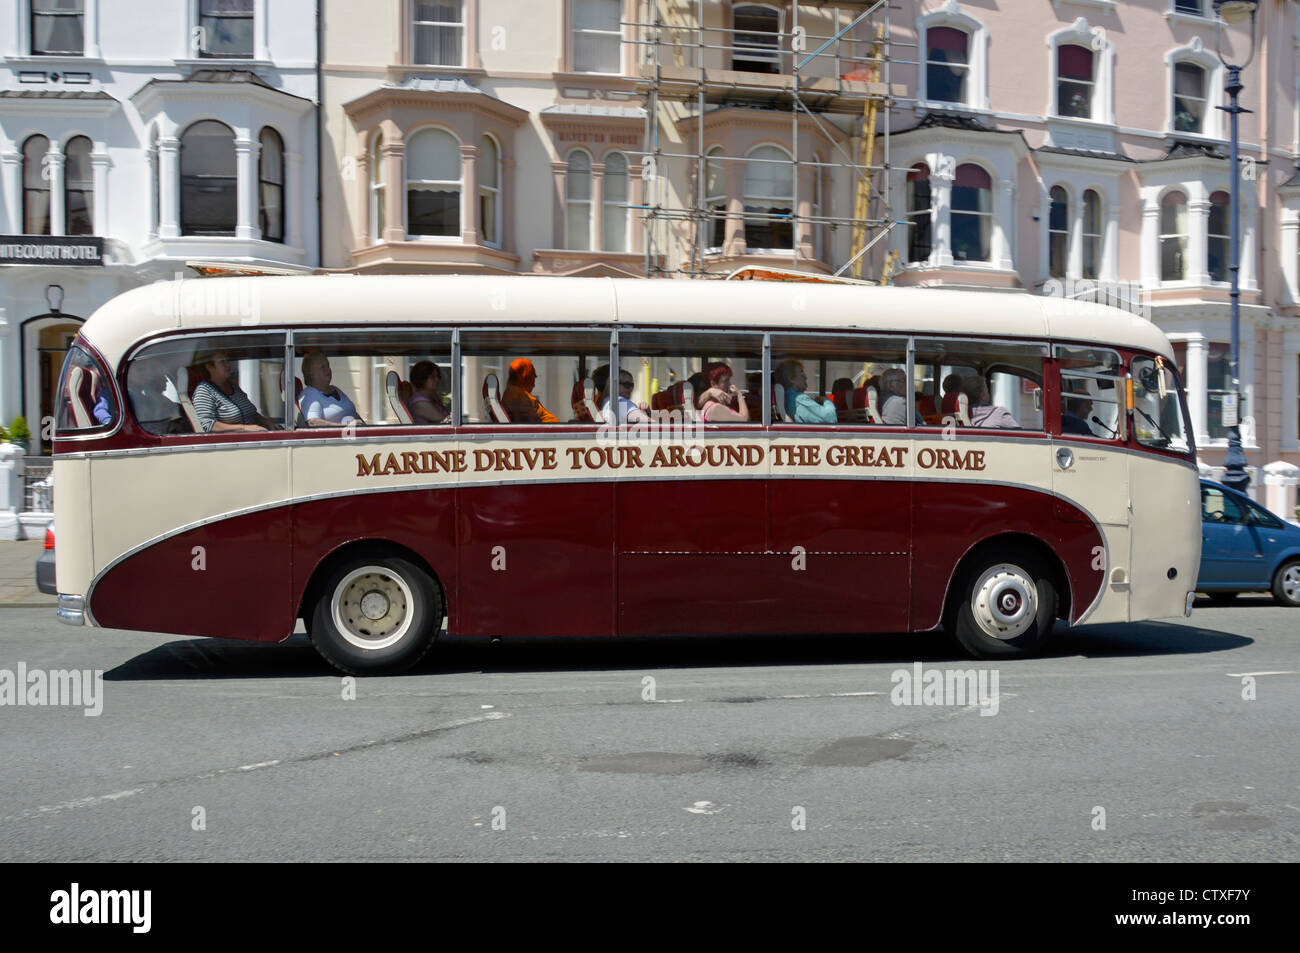 Old fashioned coach being used for scenic tour around the Great Orme Marine Drive Stock Photo